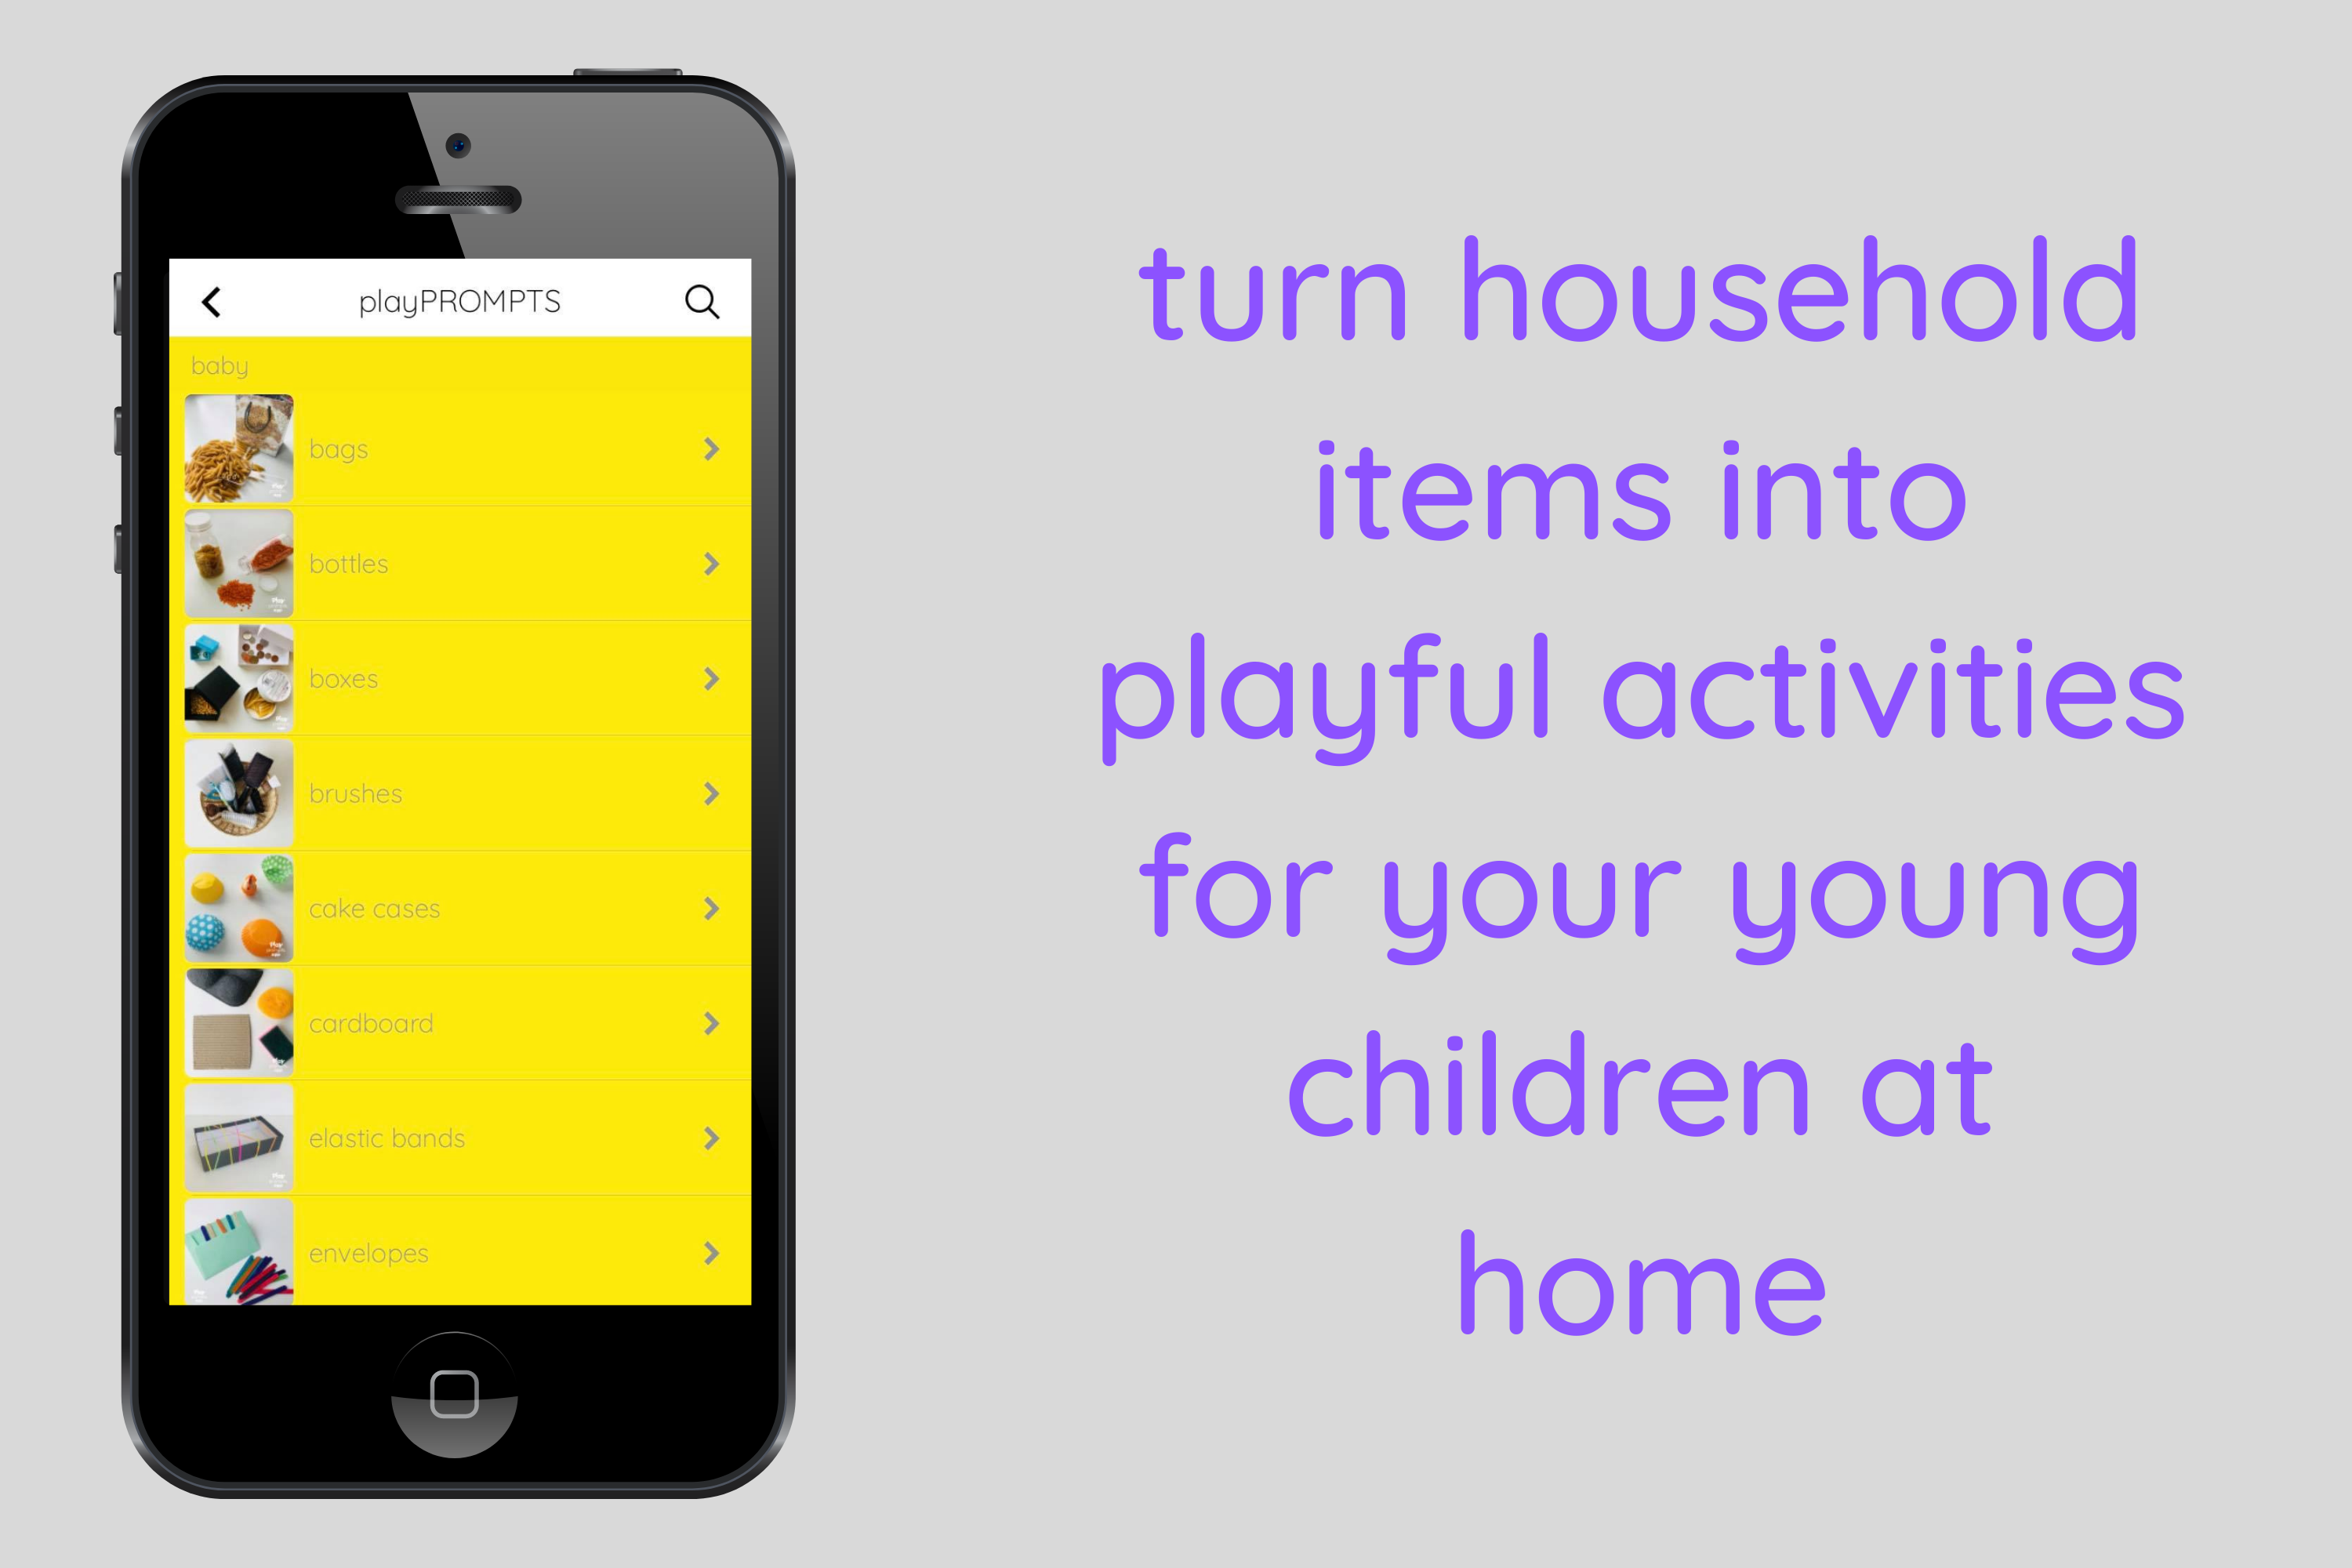 turn household items into playful activities for your young kids at home | playPROMPTS app | playHOORAY!